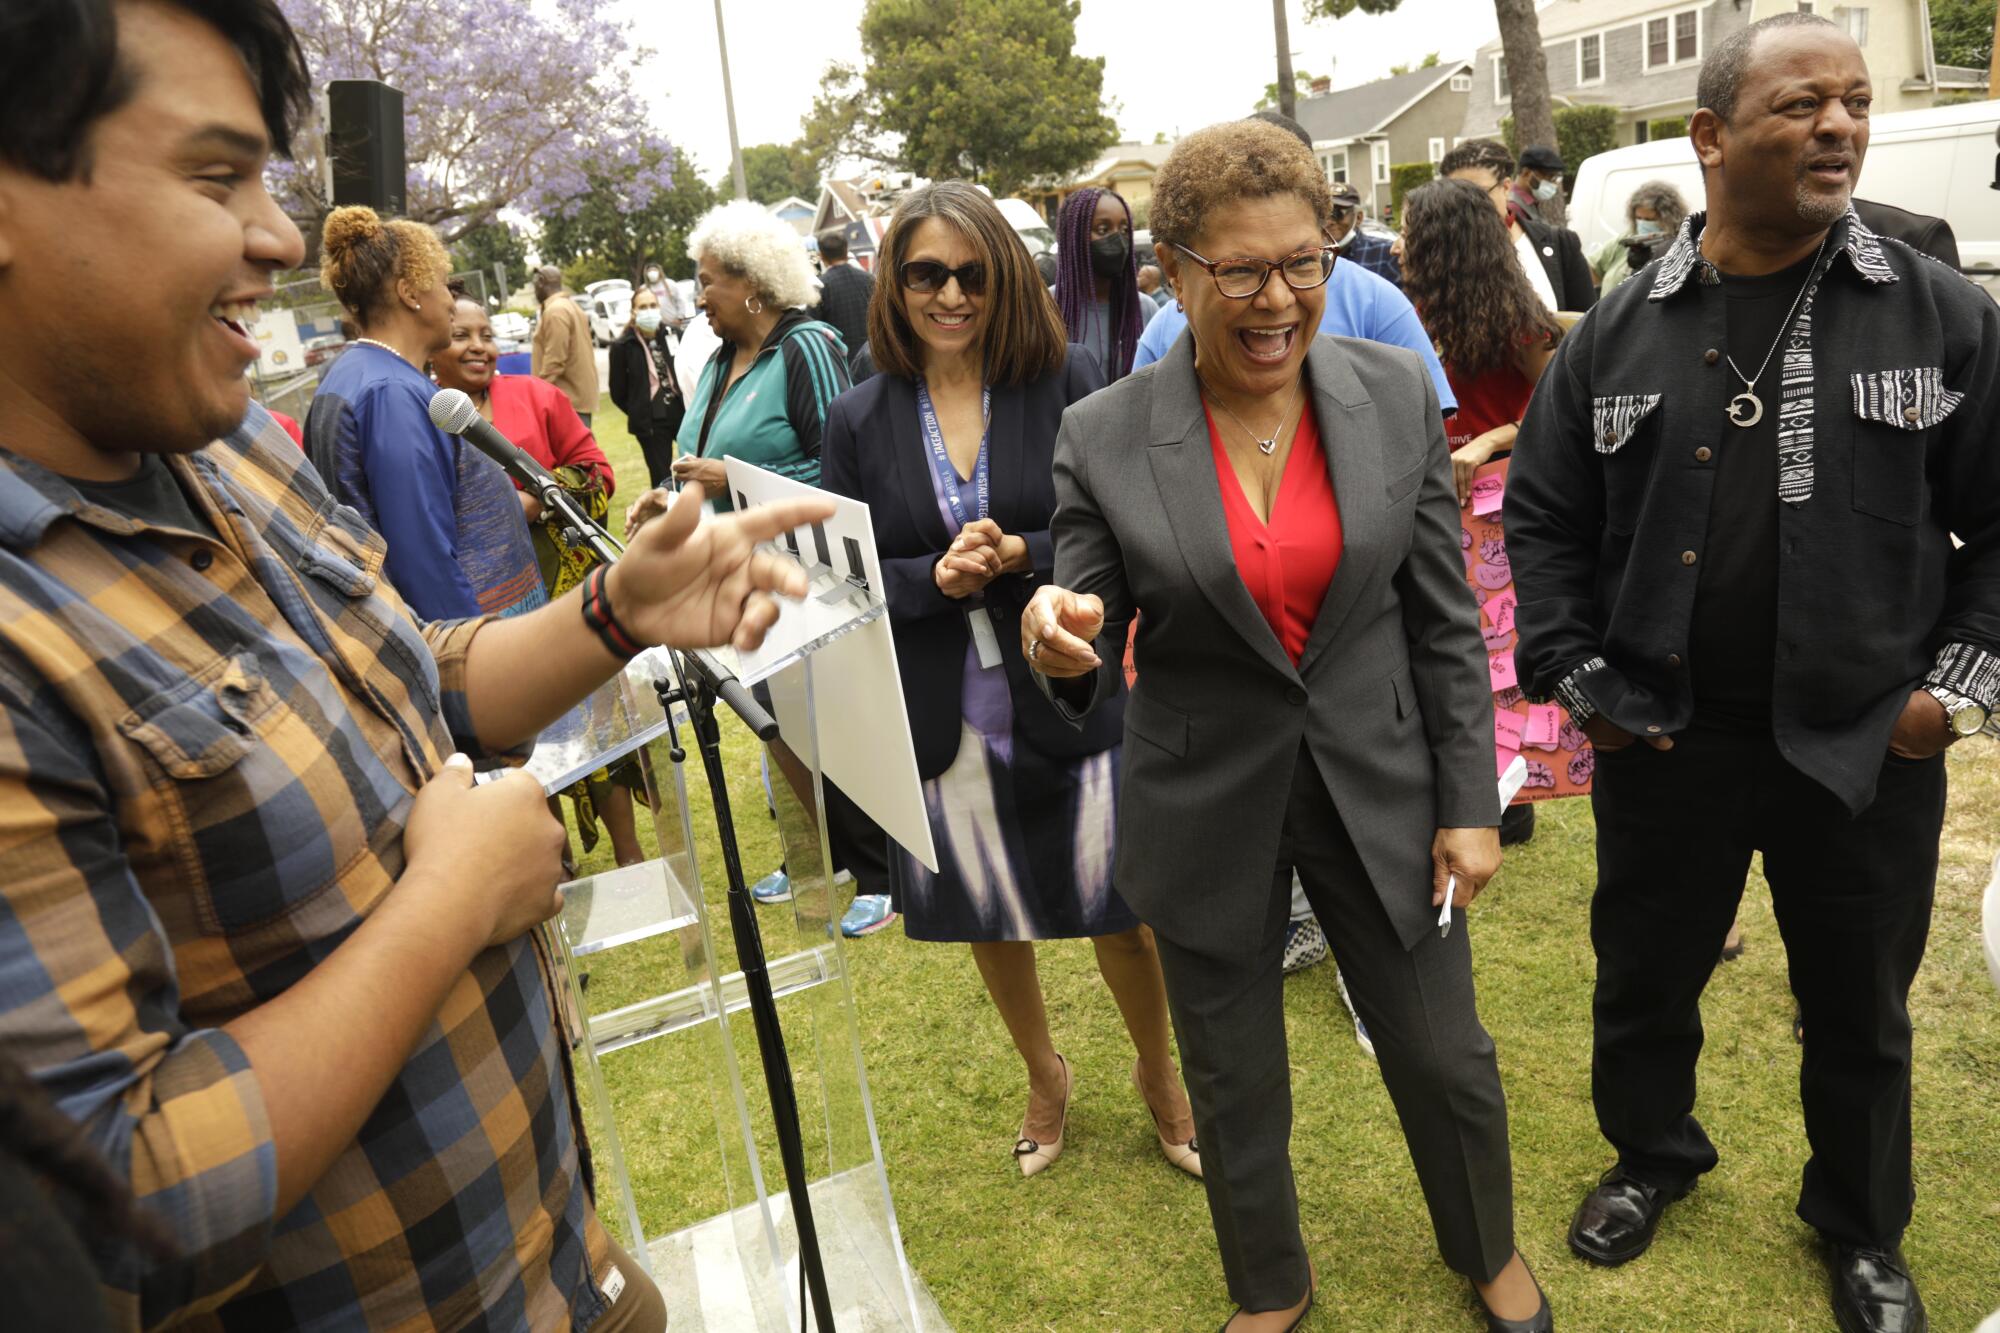 Rep. Karen Bass, center, spends time with supporters at a news conference.